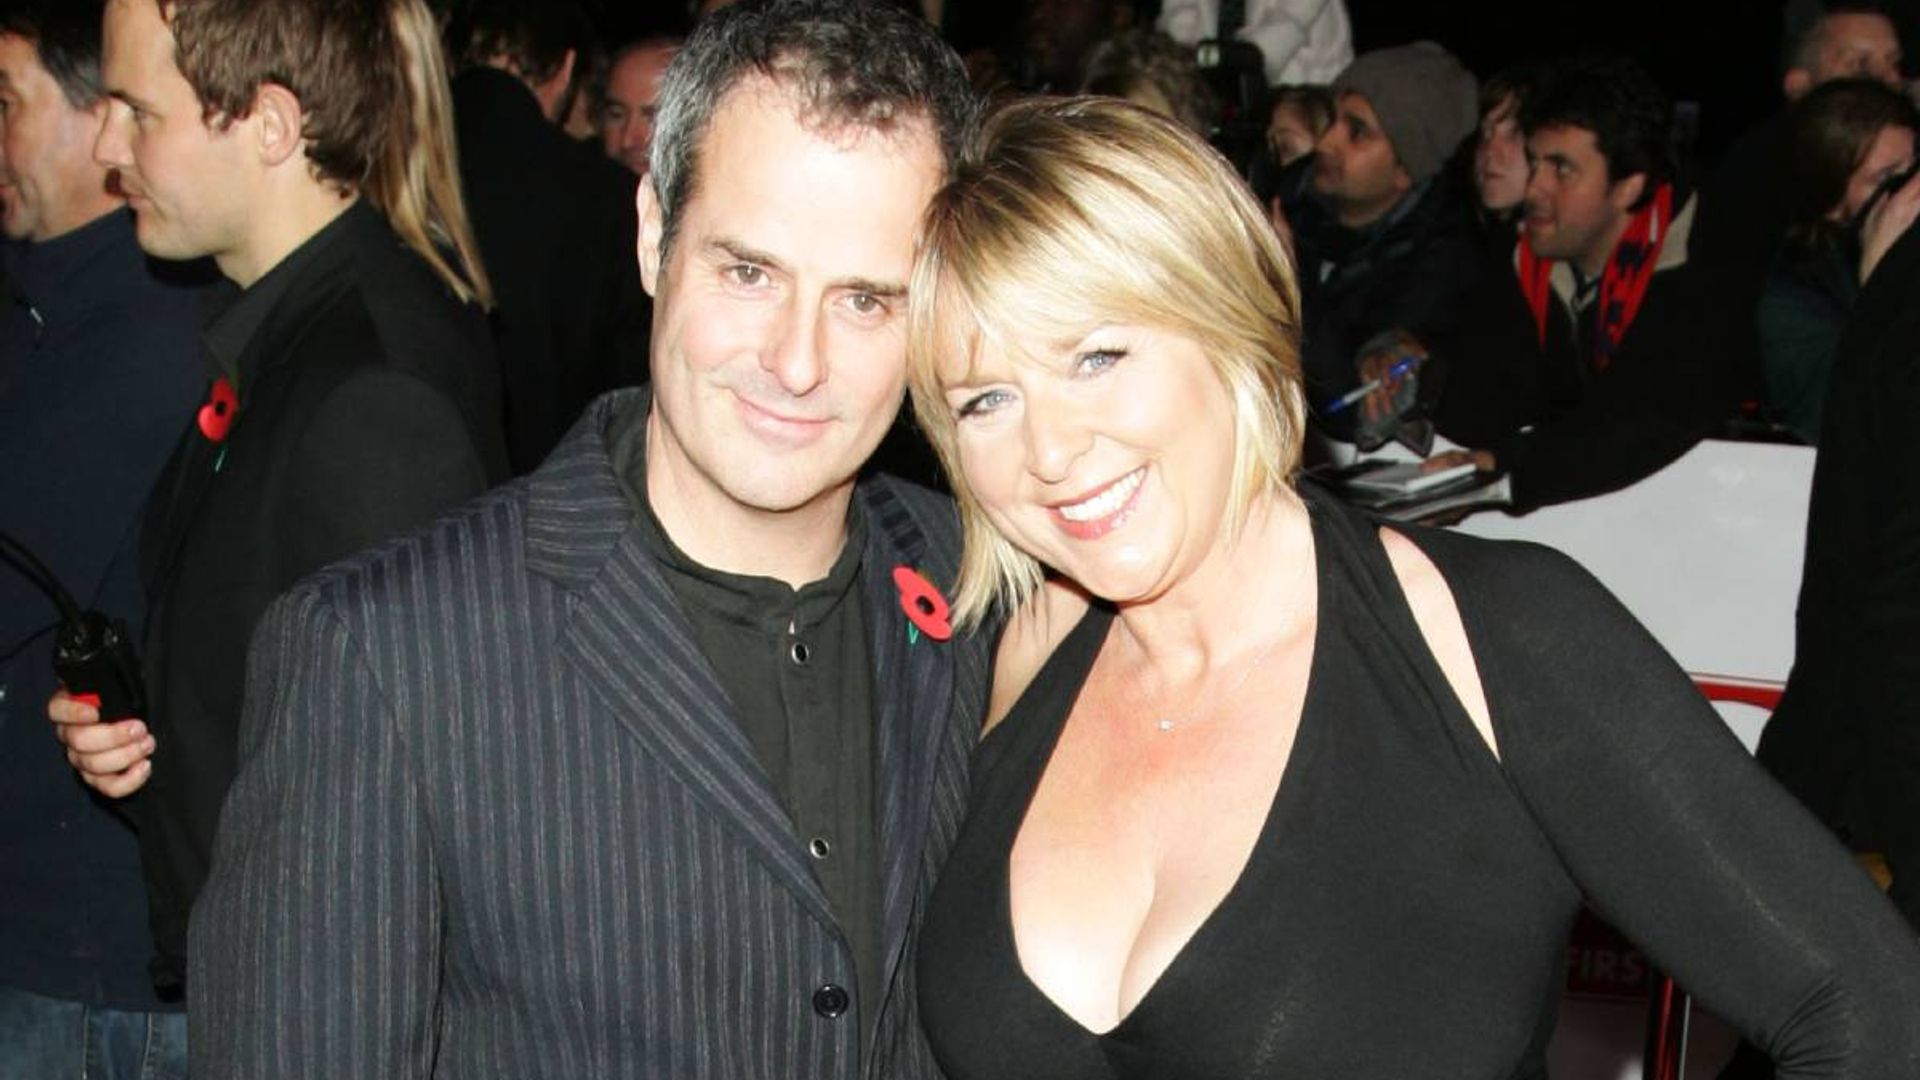 Fern Britton breaks silence with emotional message following shock split from Phil Vickery